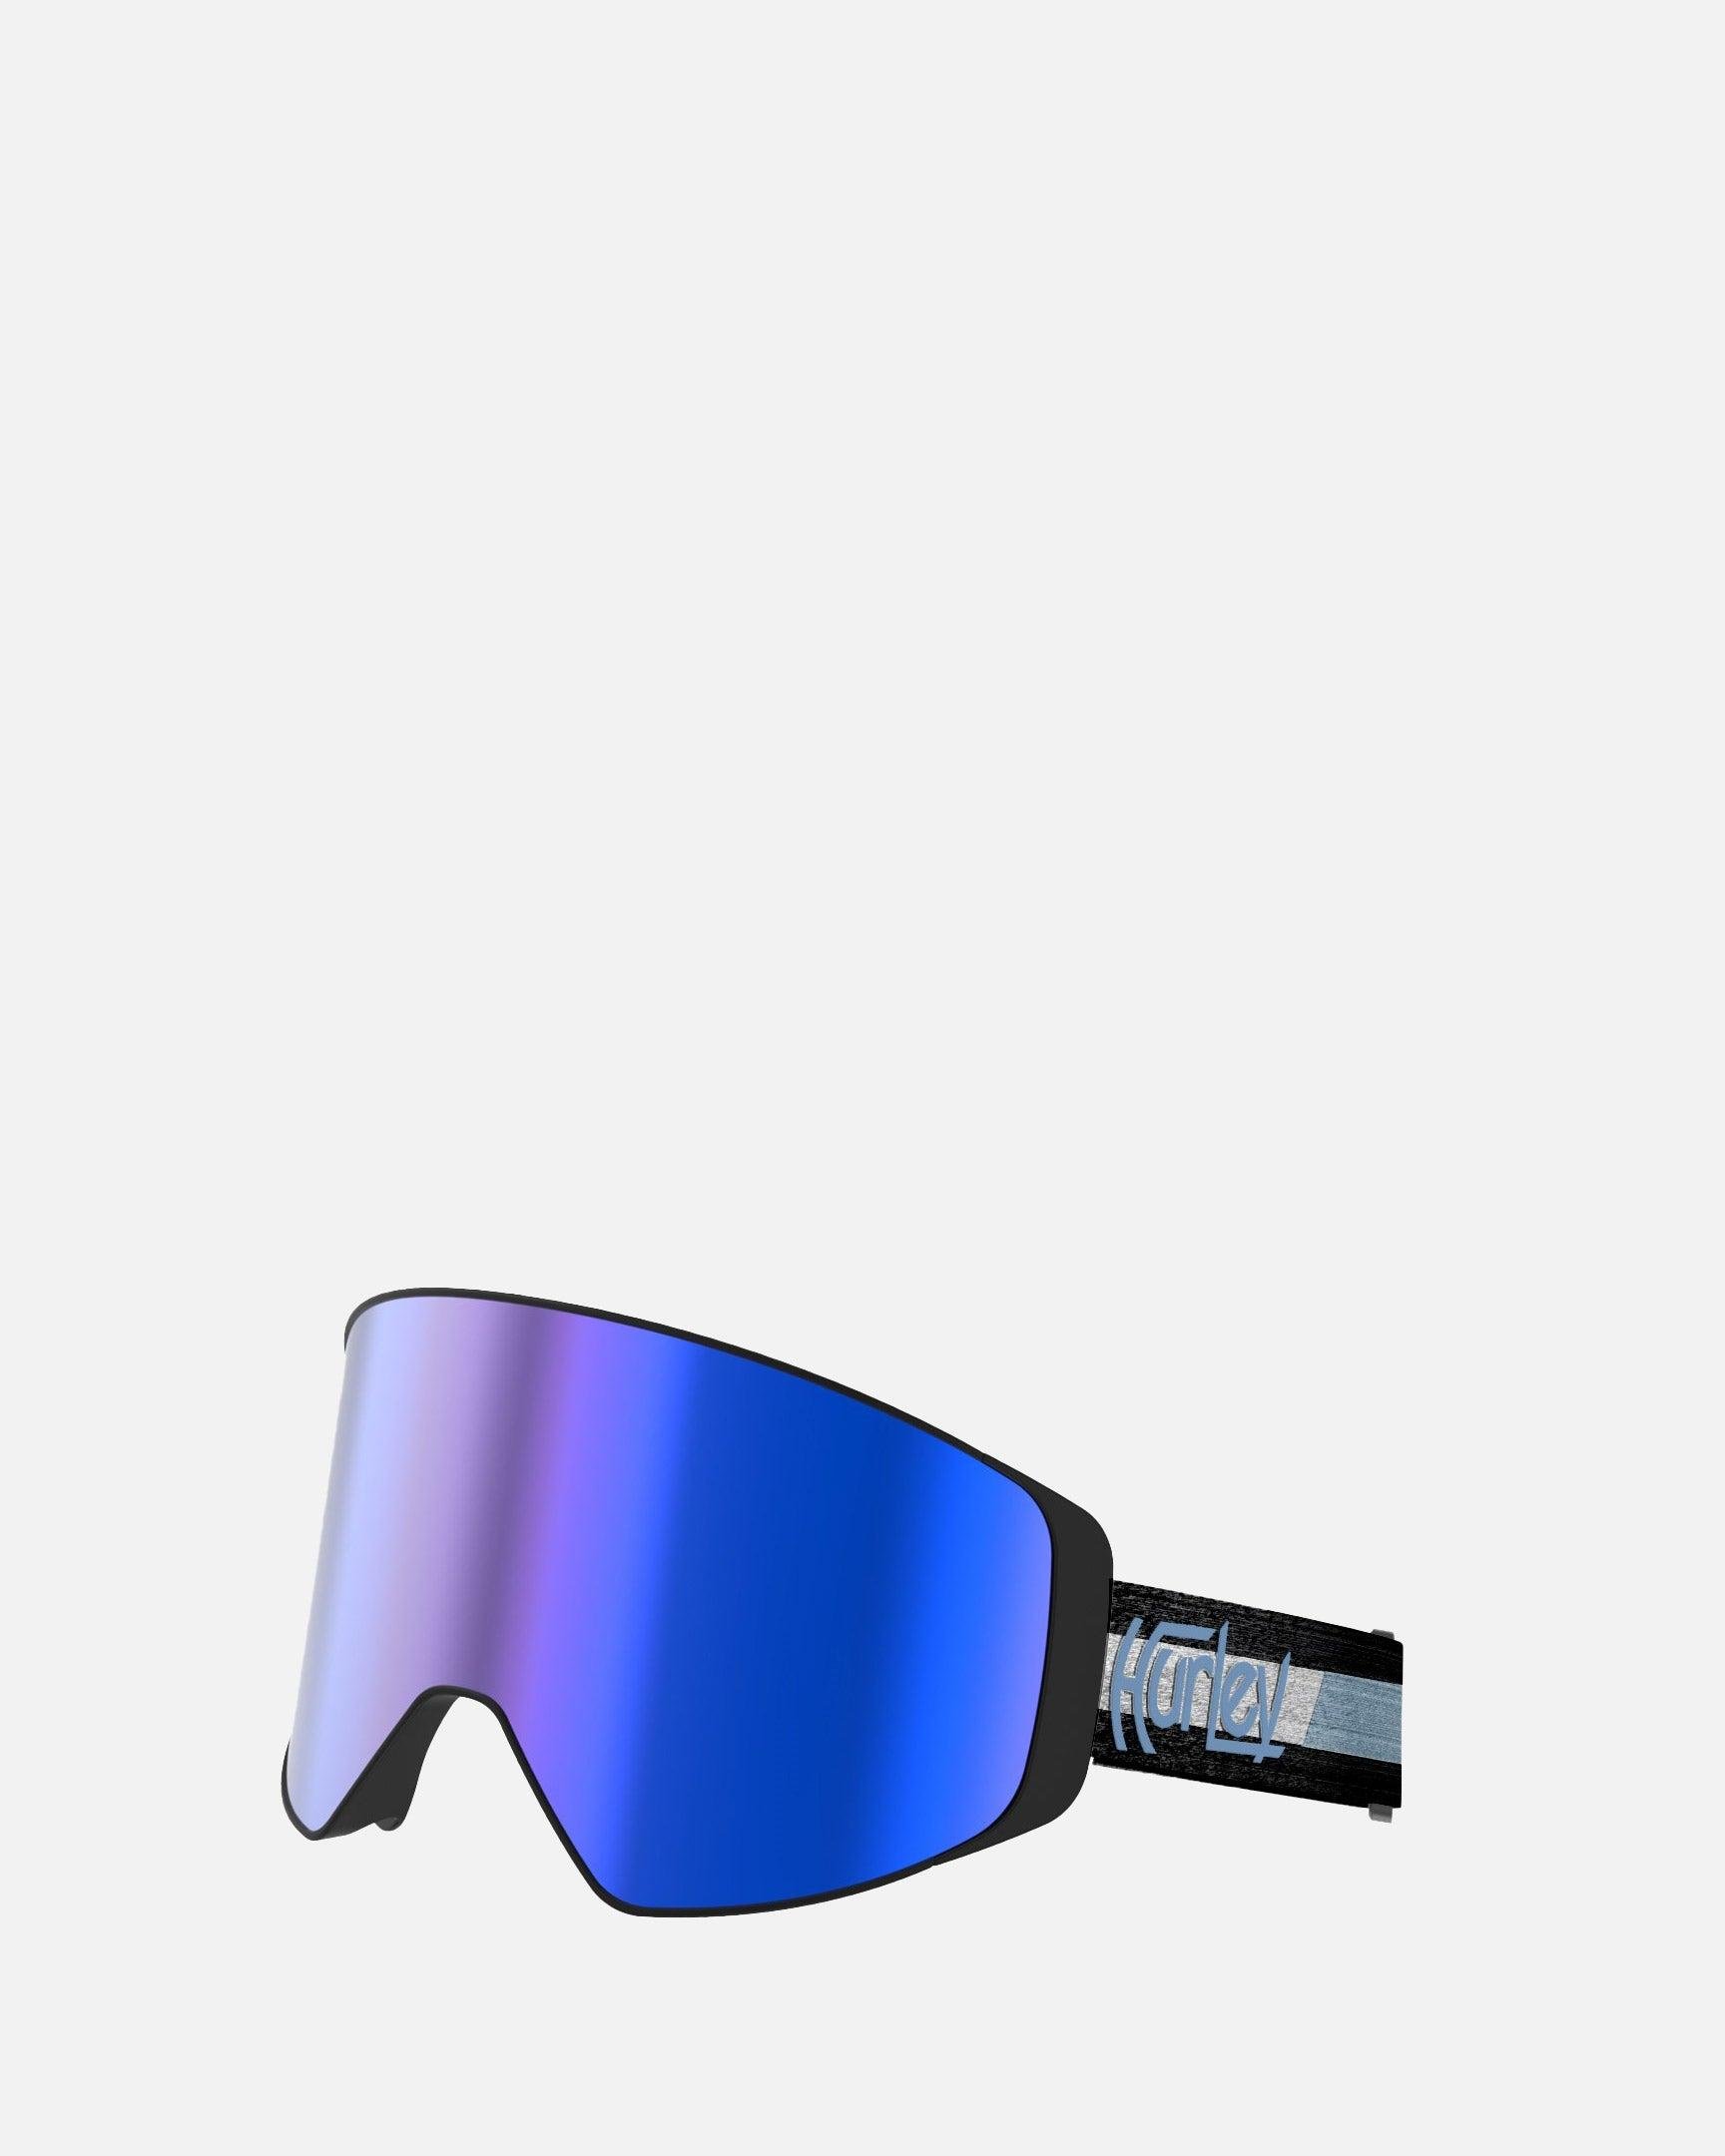 Hurley Cylindrical Snow Goggles by HURLEY